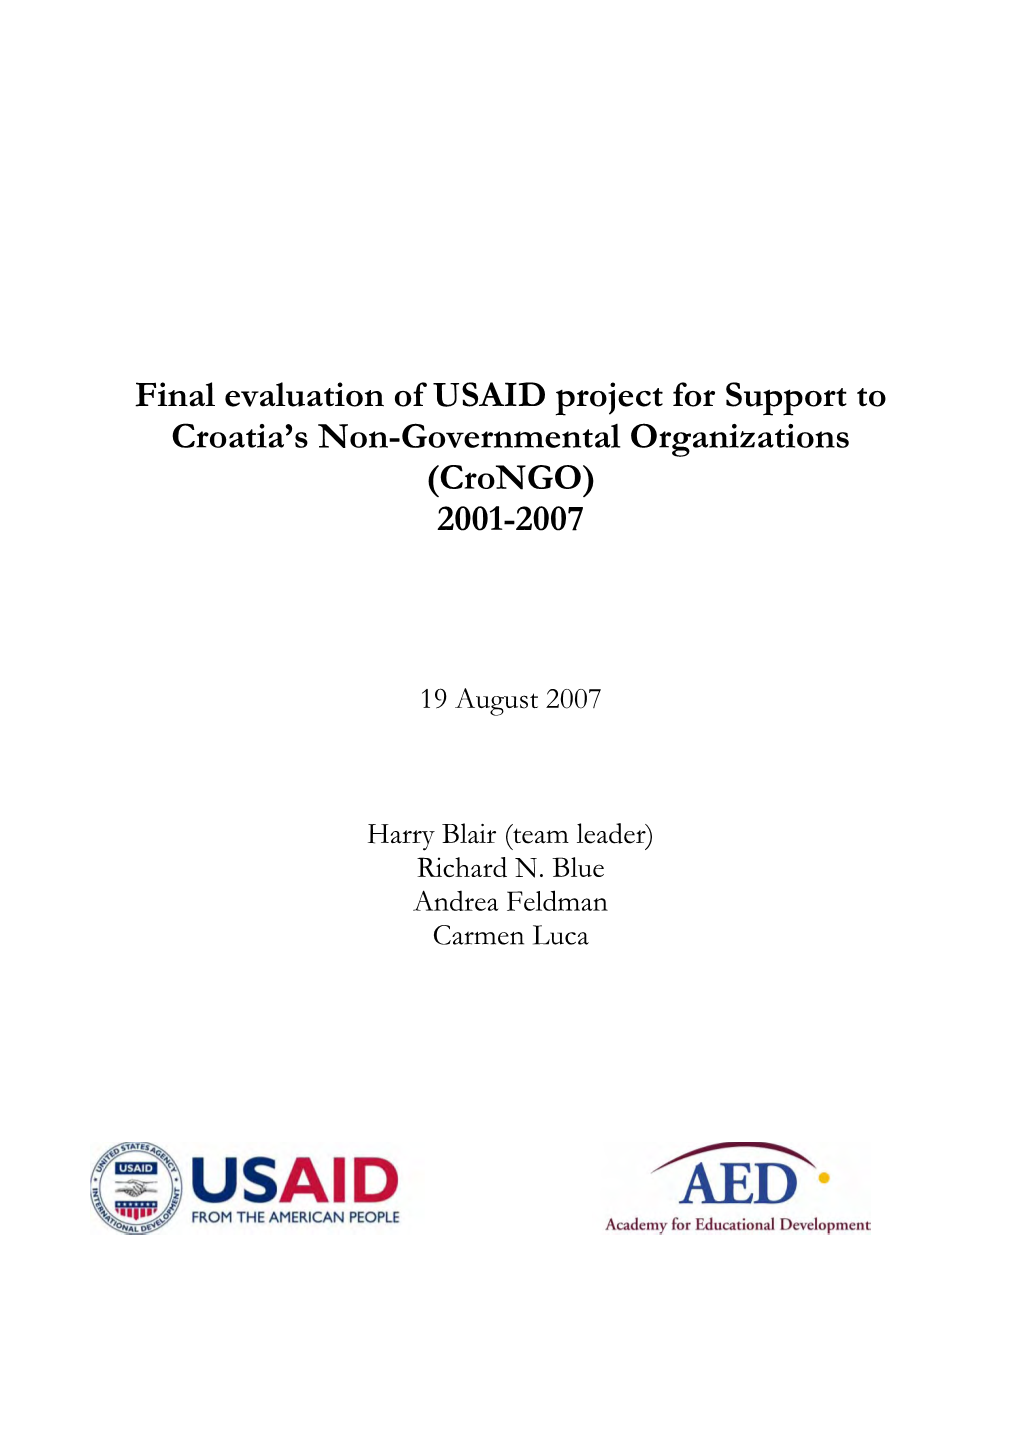 Final Evaluation of USAID Project for Support to Croatia's Non-Governmental Organizations (Crongo) 2001-2007